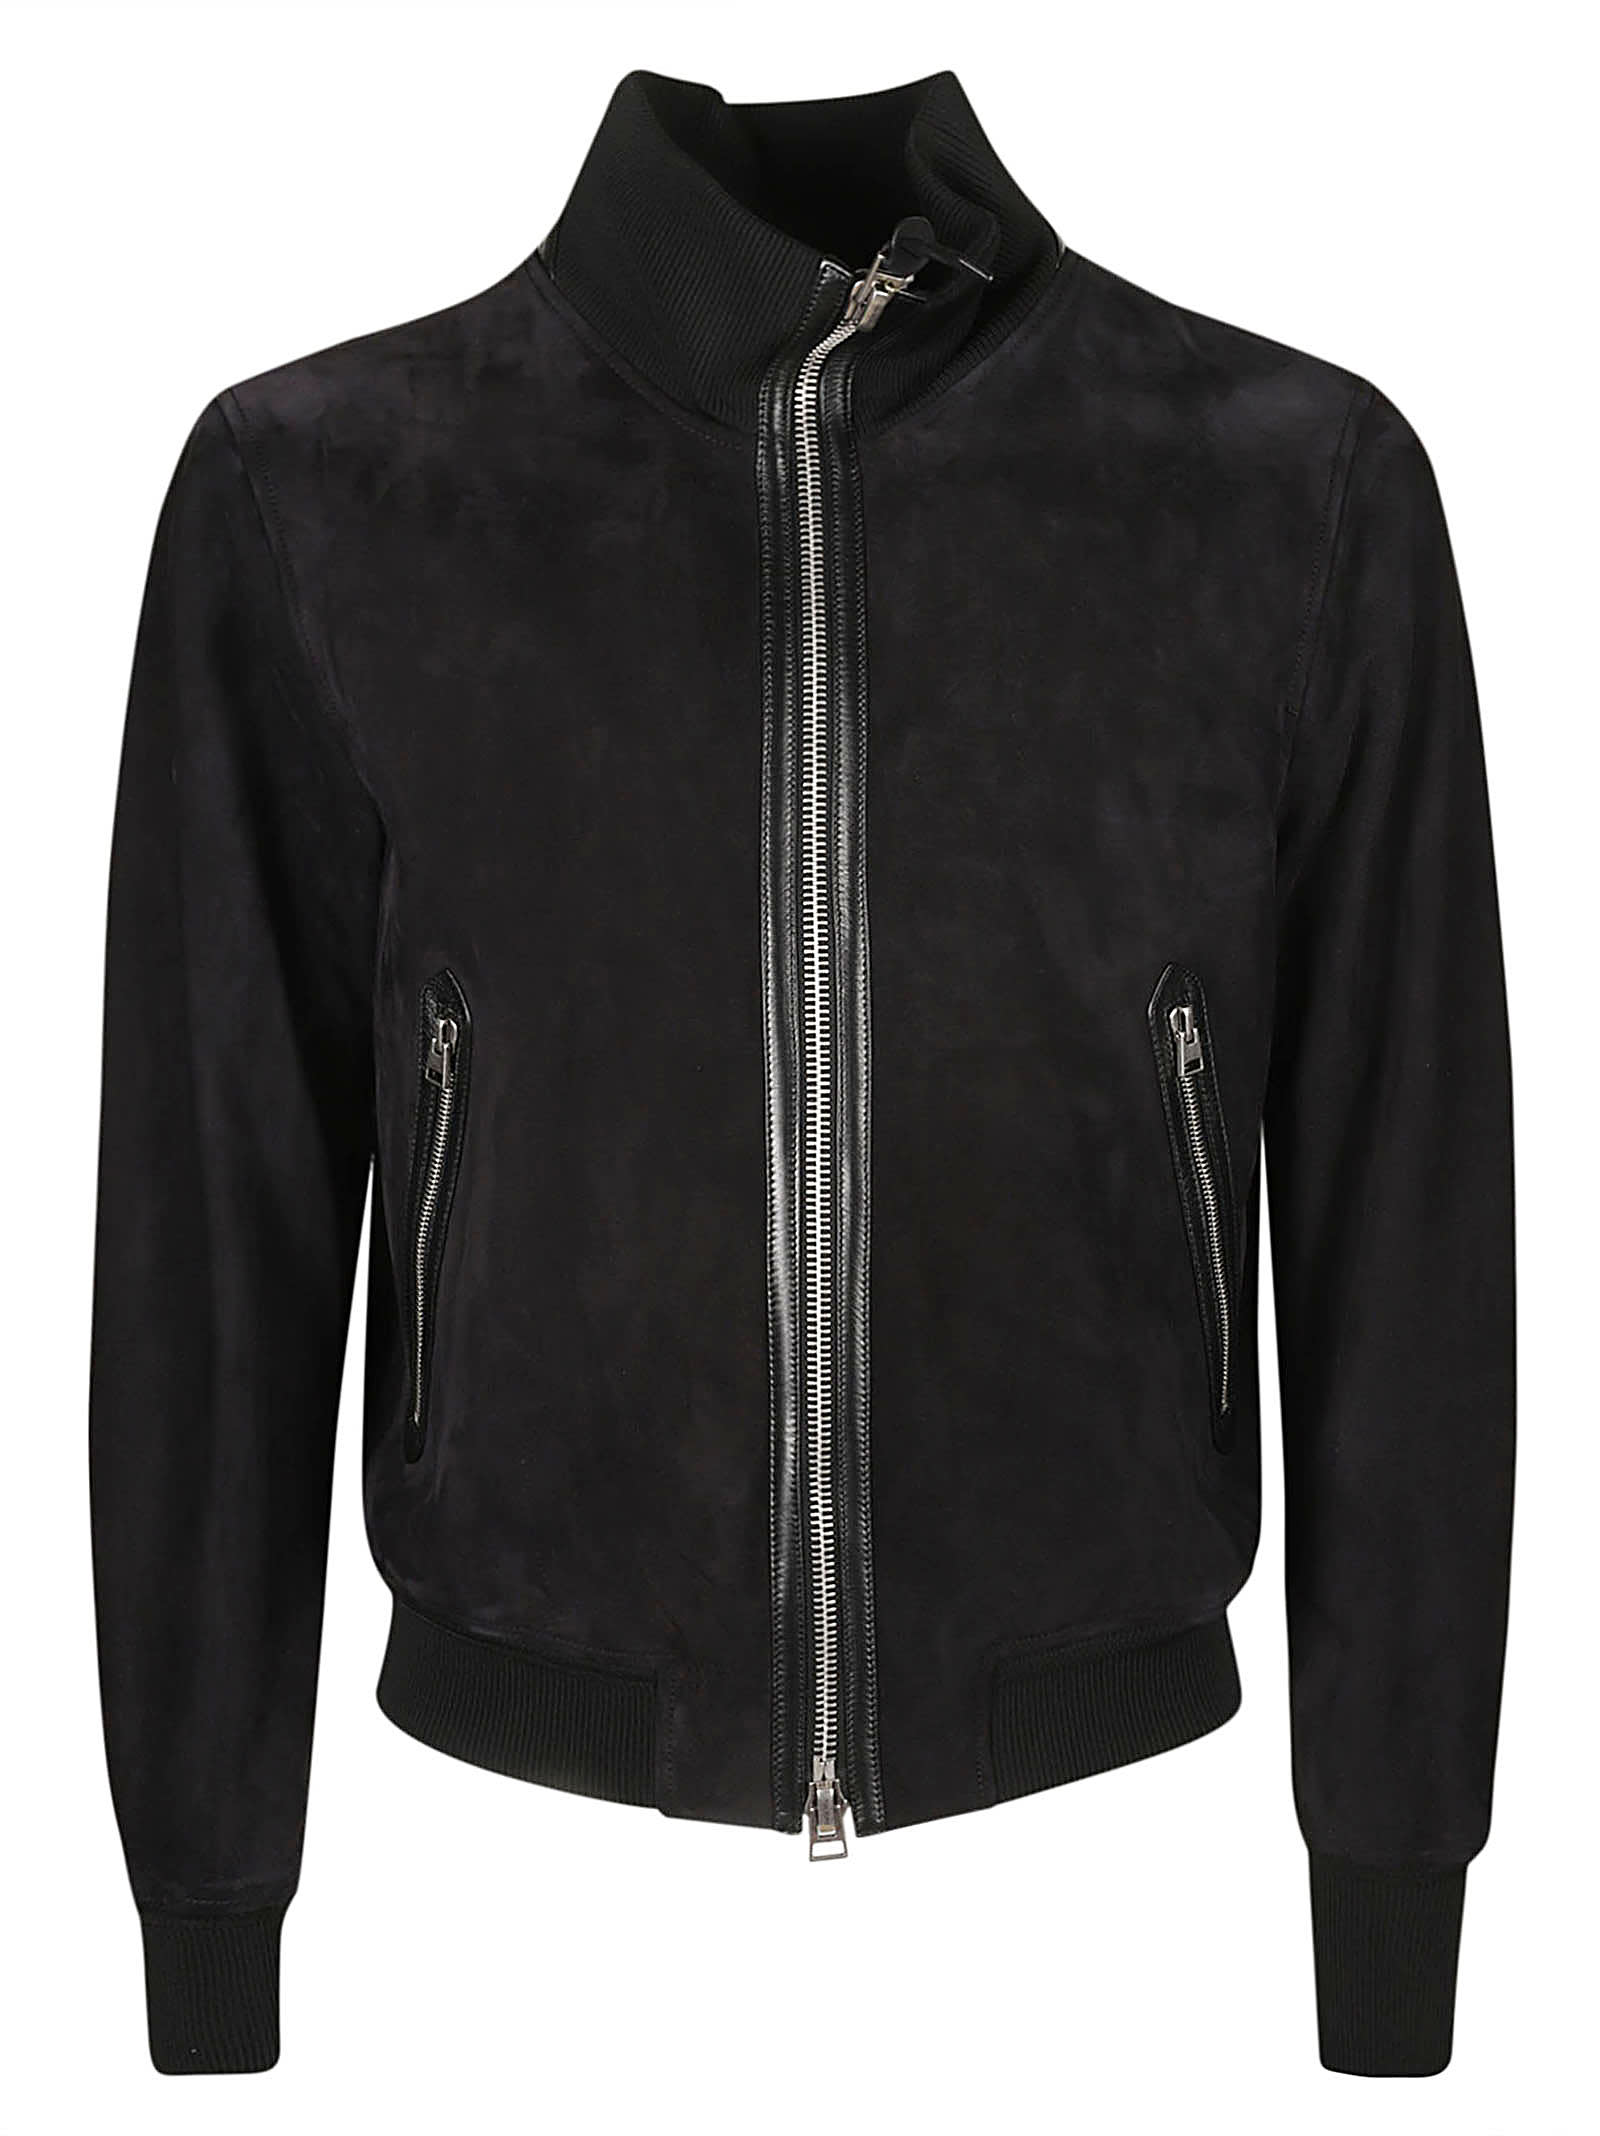 TOM FORD HIGH-NECK ZIPPED JACKET